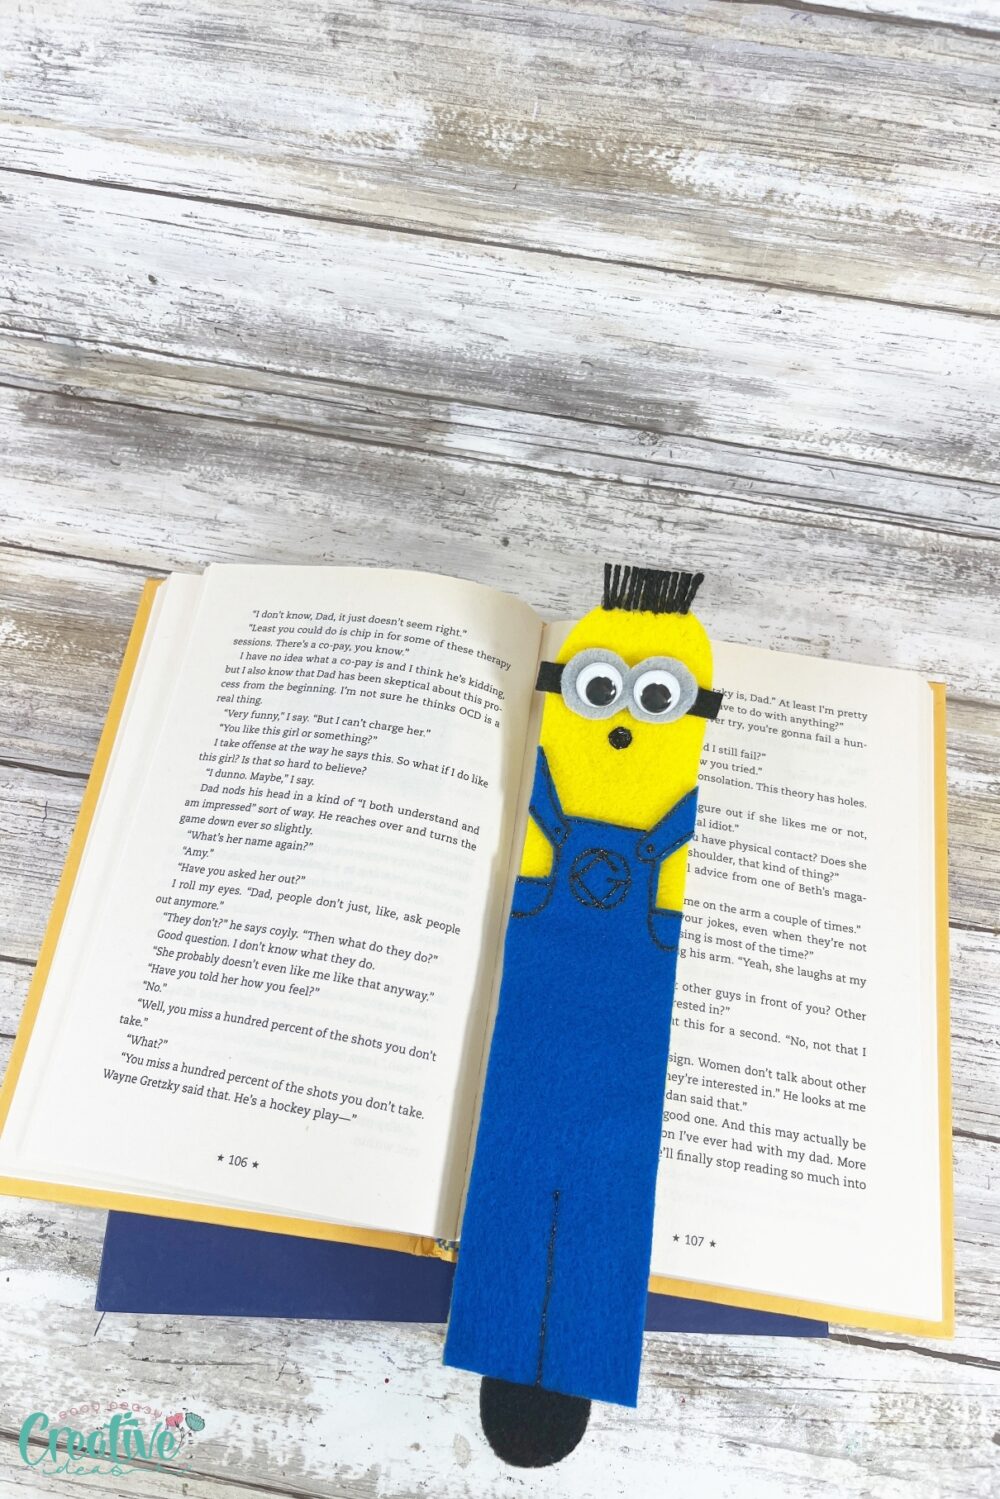 Get the minion bookmark template for these adorable bookmarks to brighten up your reading experience! Perfect for all ages.